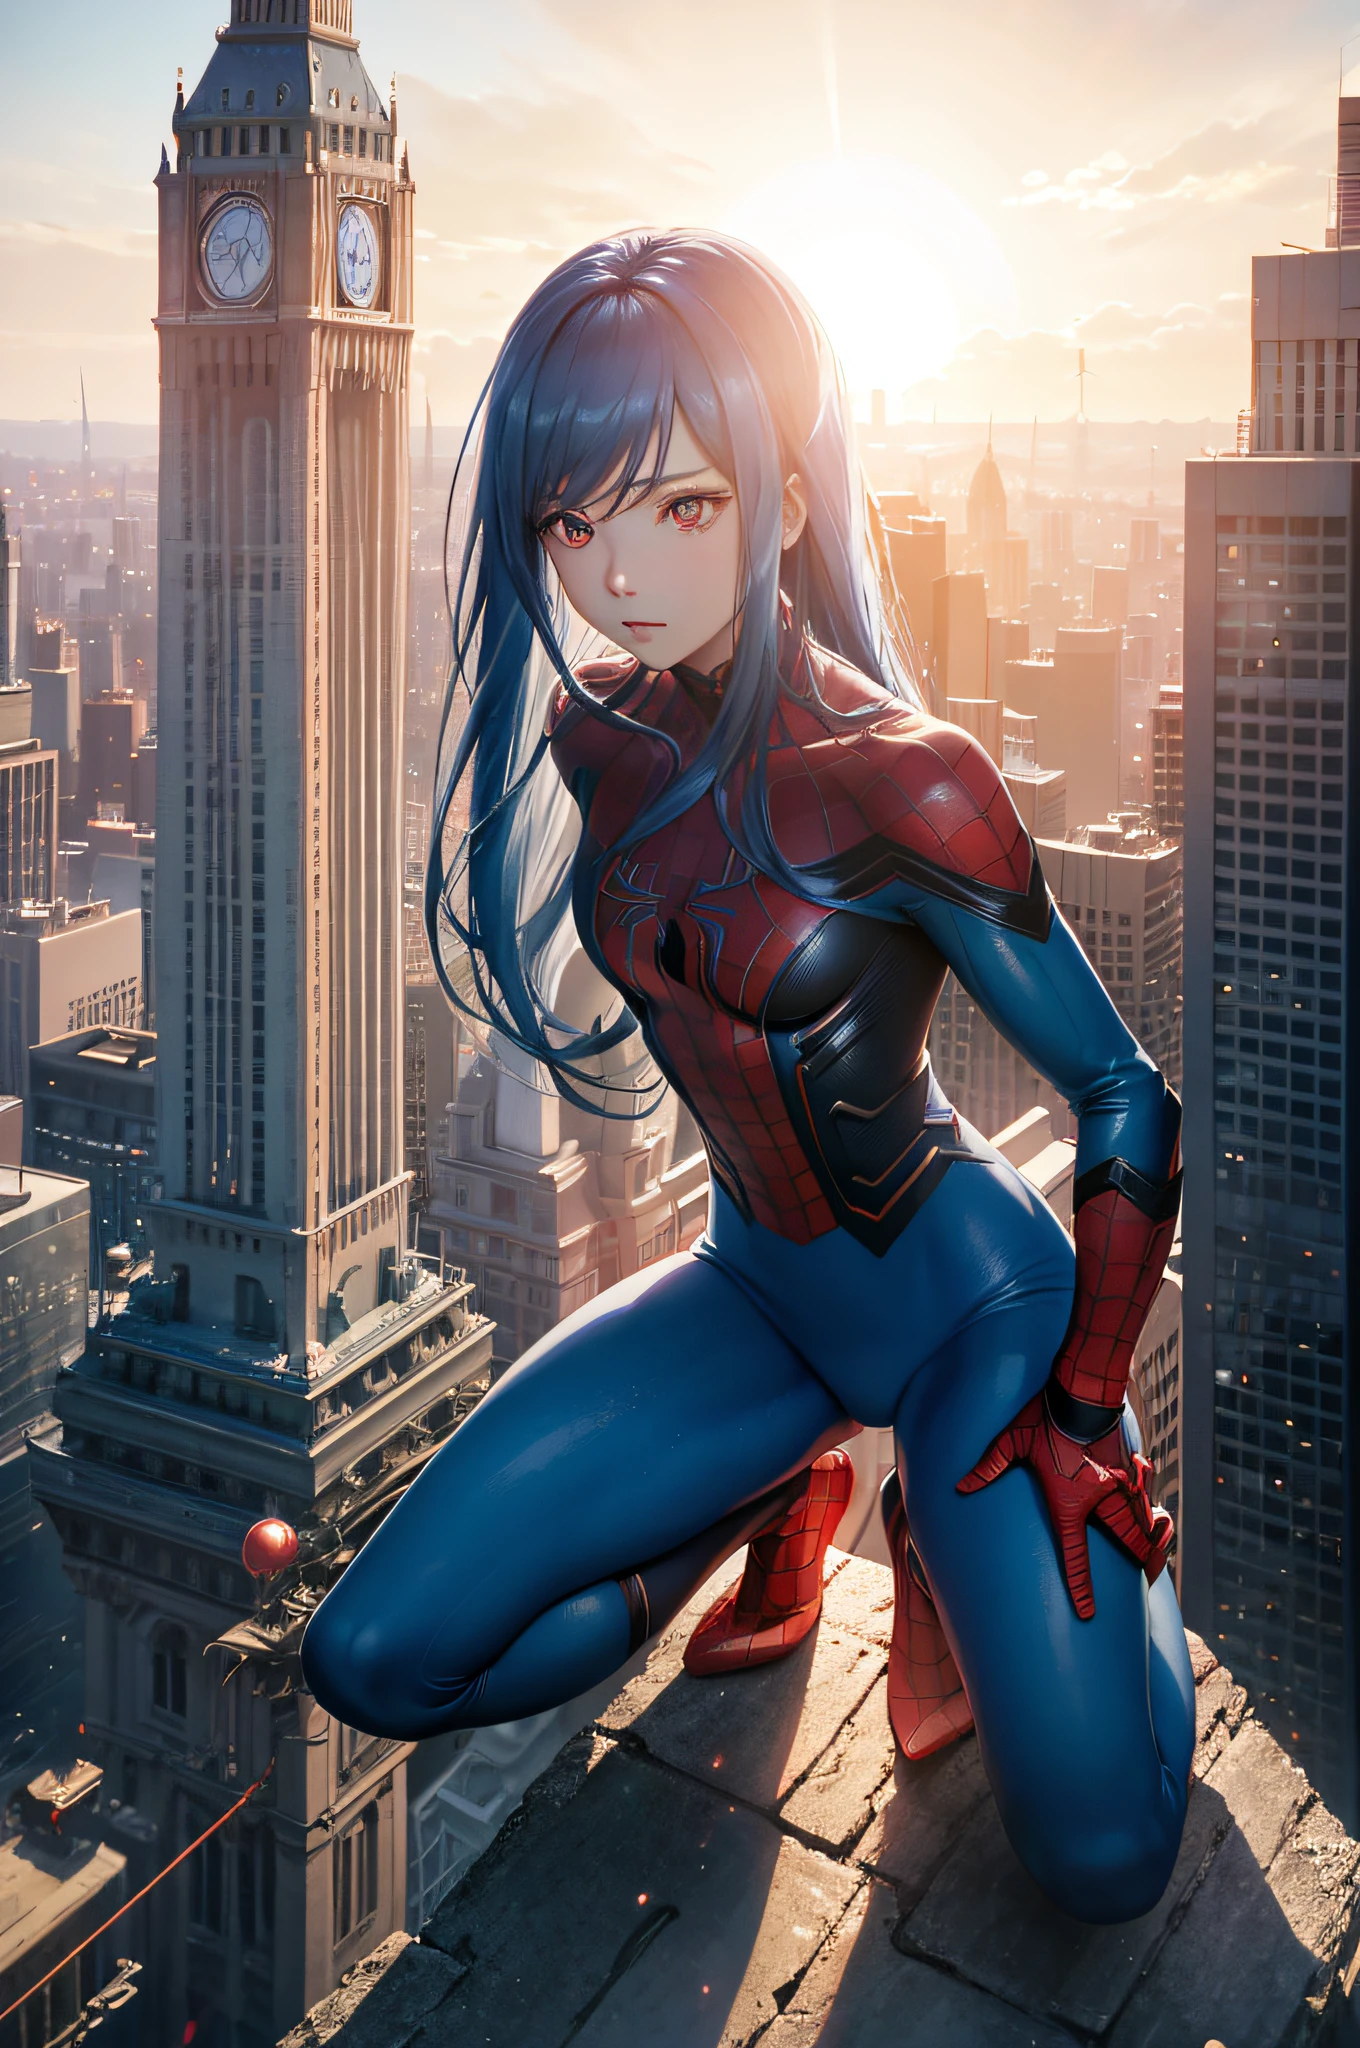 symple background、City view from above、Excellent style, Delicate skin, Beautiful hair, Beautiful blue hair, Beautiful eyes, At the back, Looking here, Red and blue full-body tights、spider-man、Crouch at the top of the tower、Thrust one hand forward、Best shot from above、Very long hair, Floating hair, Shiny hair, sad, A futuristic, Anime, reflective light, nffsw, masutepiece, Best Quality, hight resolution, surrealism, Backlighting, Cowboy Shot, High quality